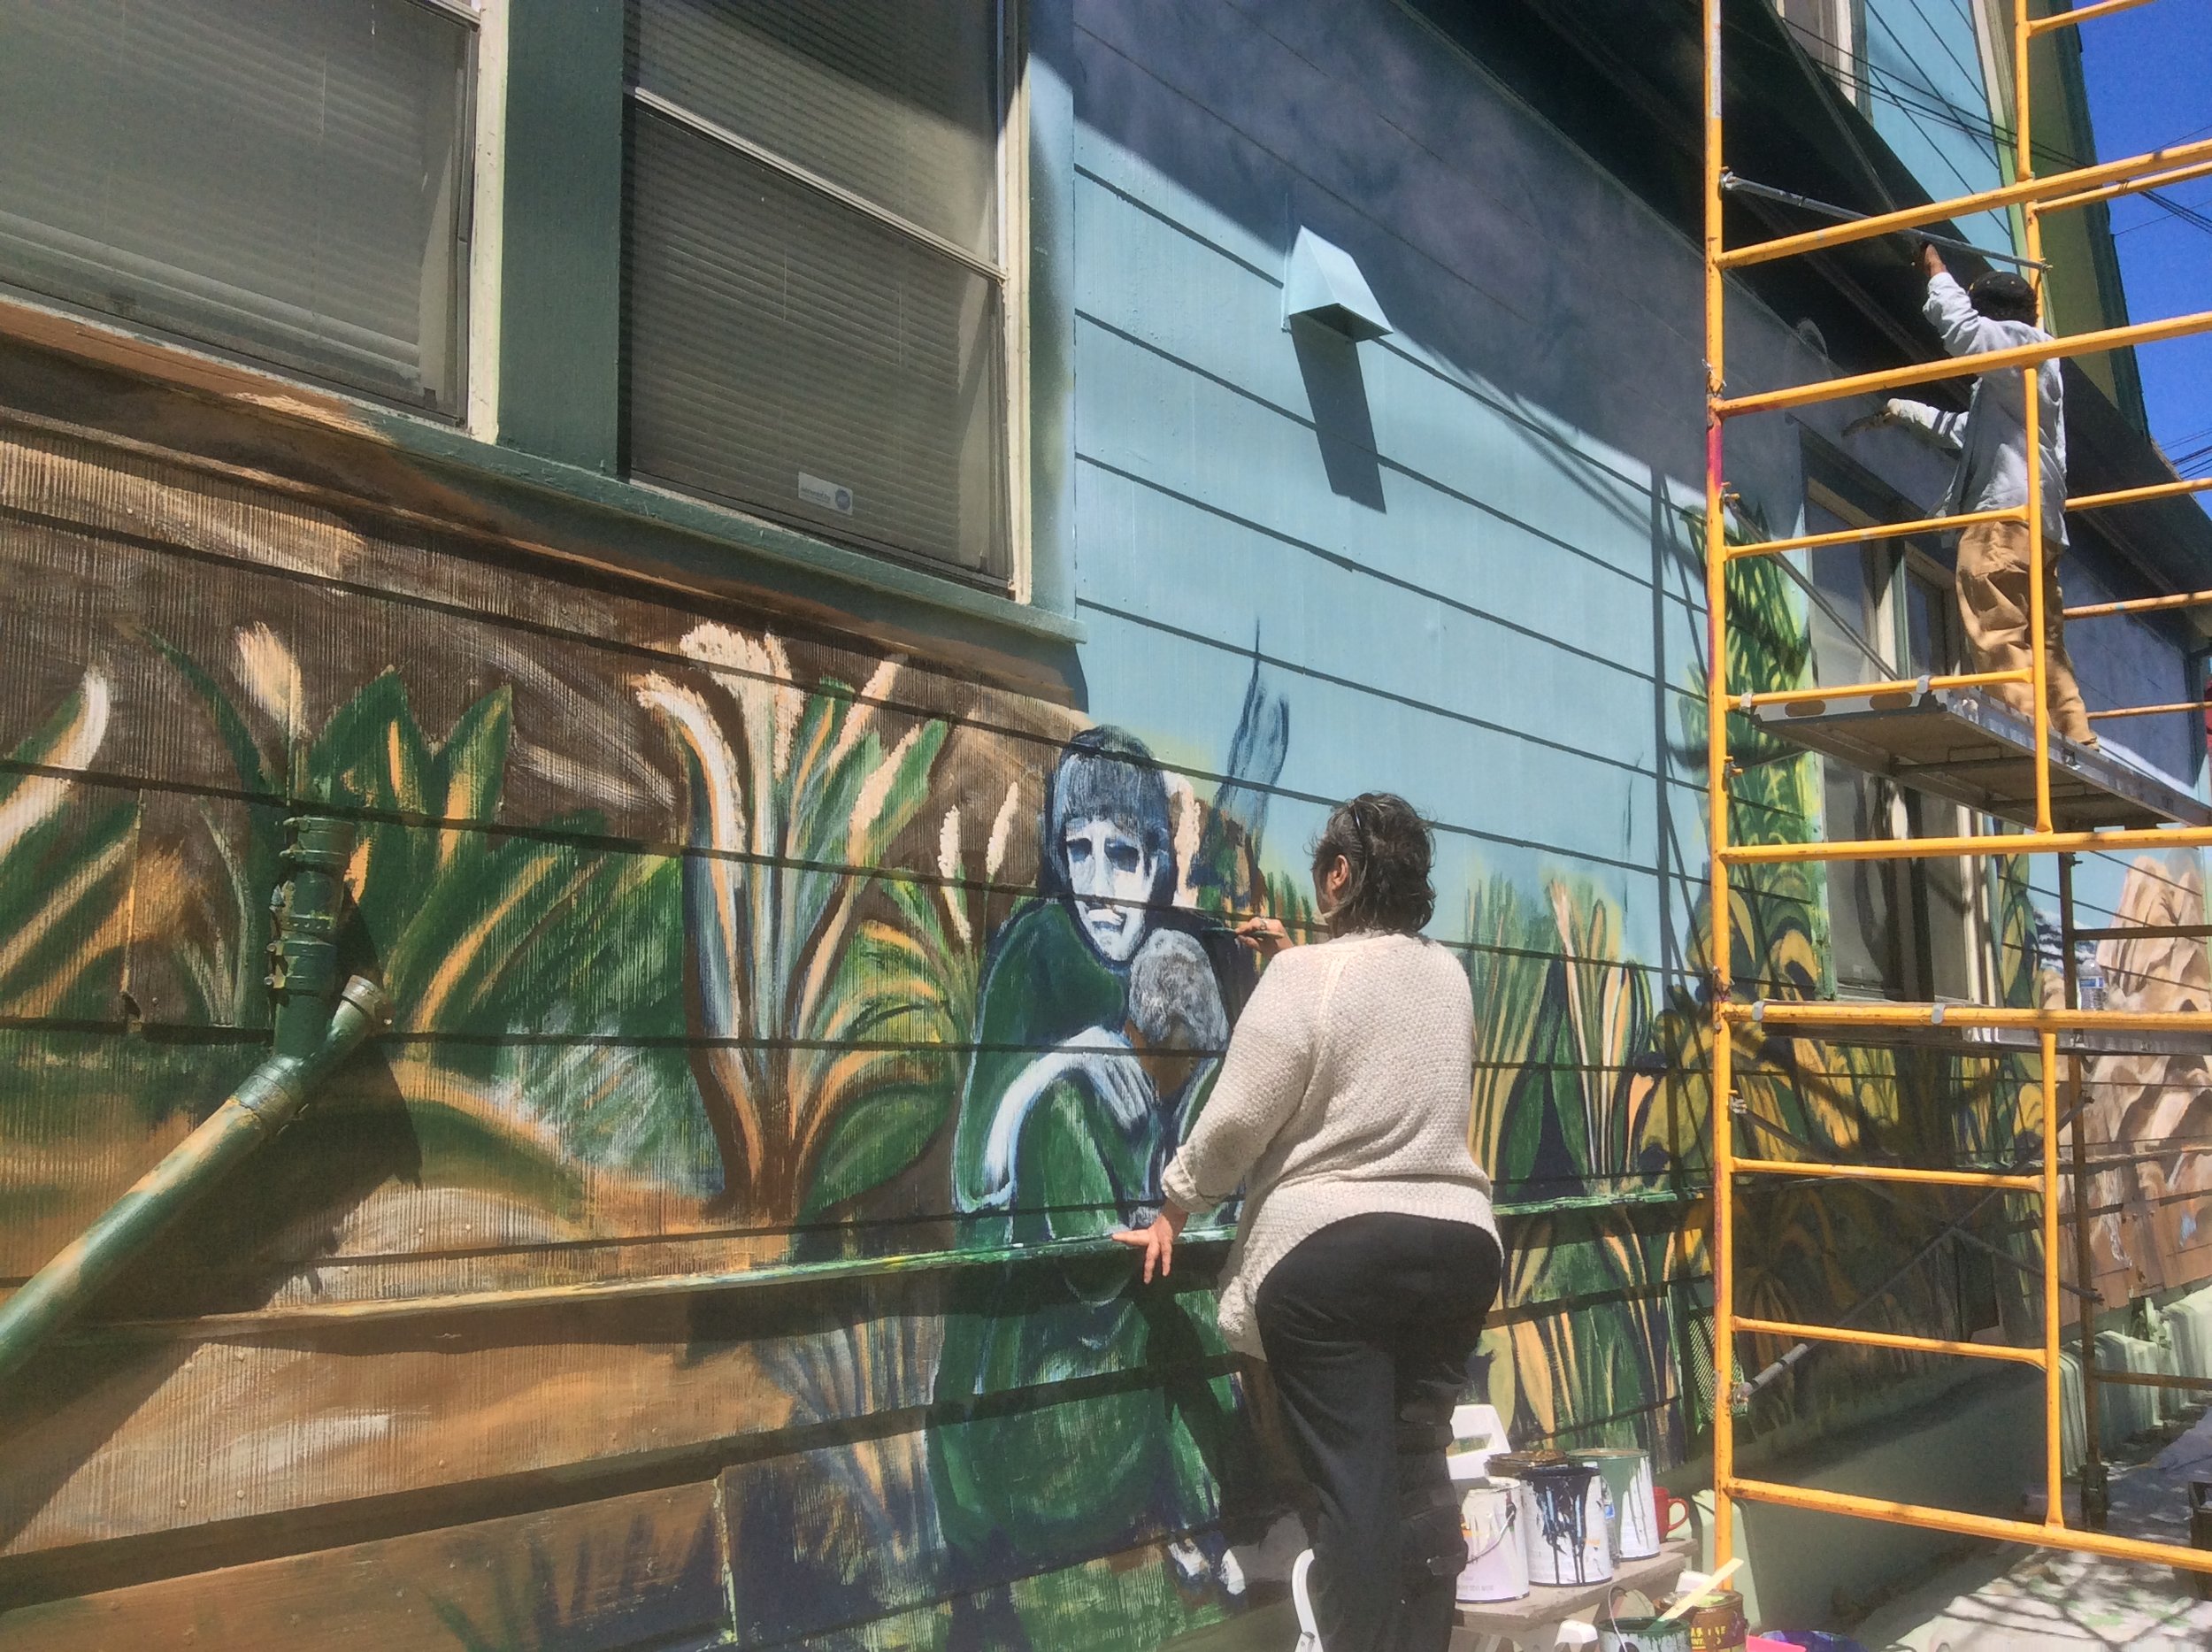 Veterans Artists, Ann Reesman and Pasha Evins working on VRP's "Faces of Veterans Through Artistic Expression" Mural Project